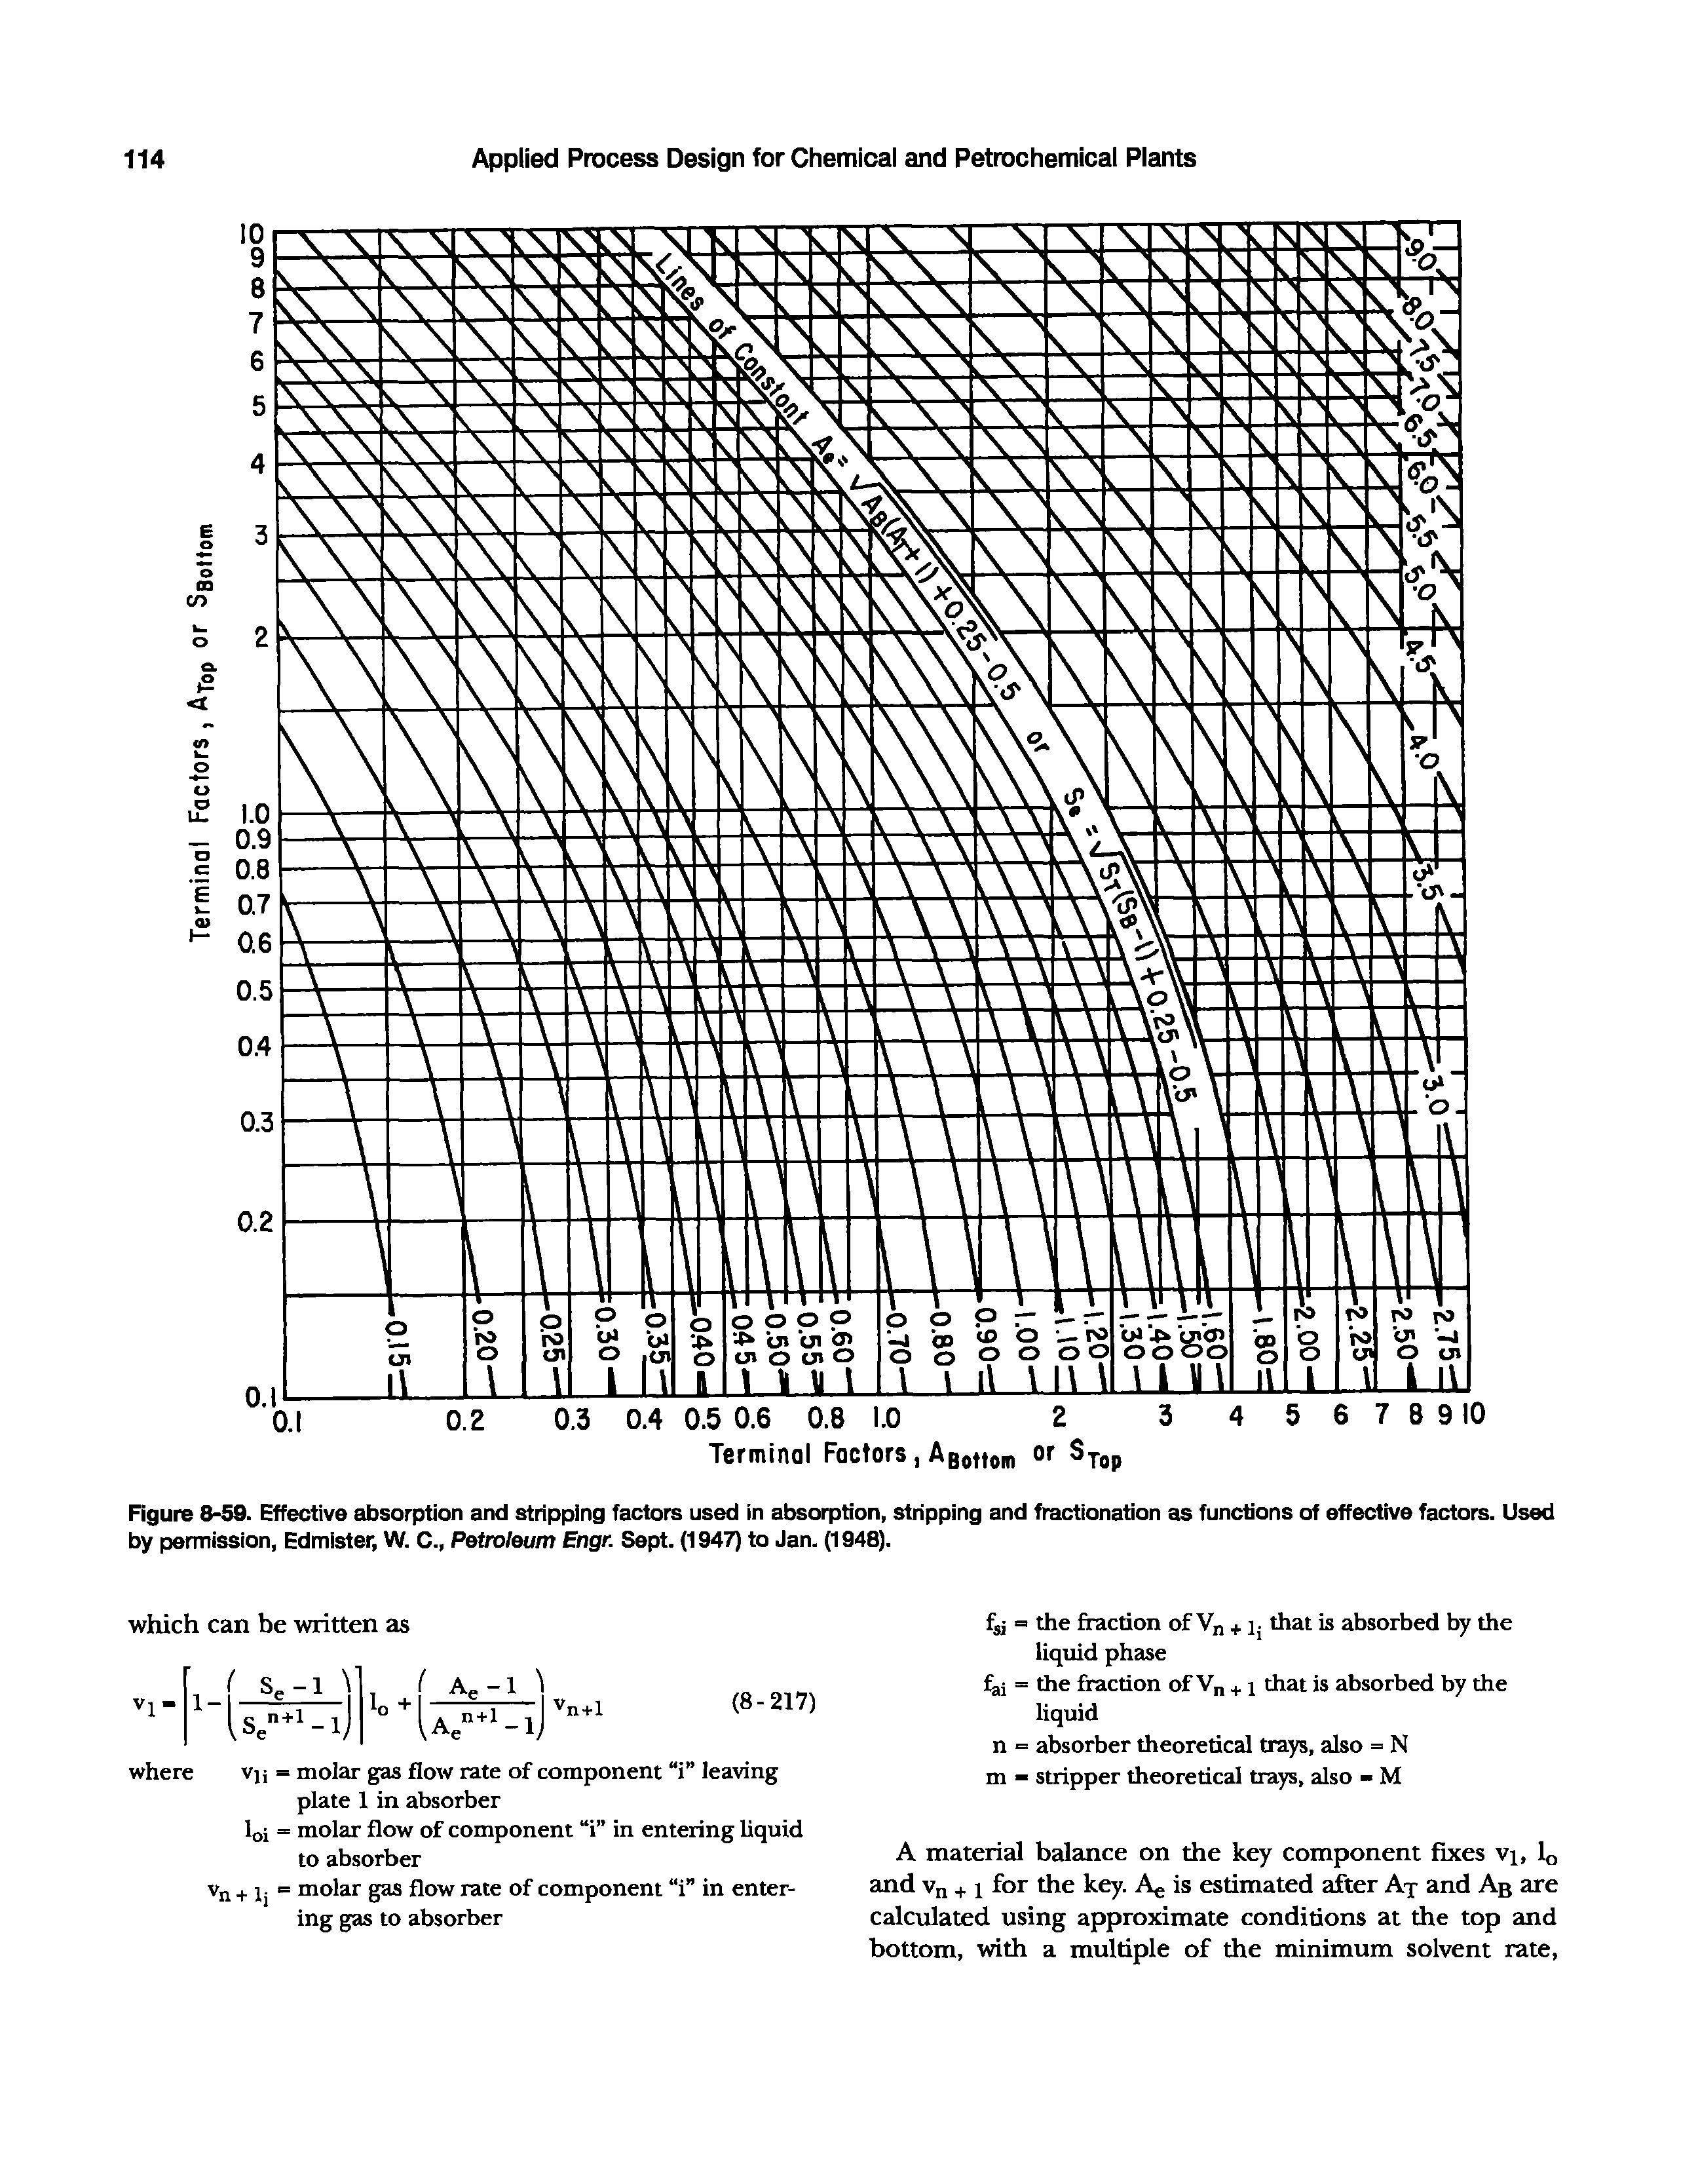 Figure 8-59. Effective absorption and stripping factors used in absorption, stripping and fractionation as functions of effective factors. Used by permission, Edmister, W. C., Petroleum Engr. Sept. (1947) to Jan. (1948).